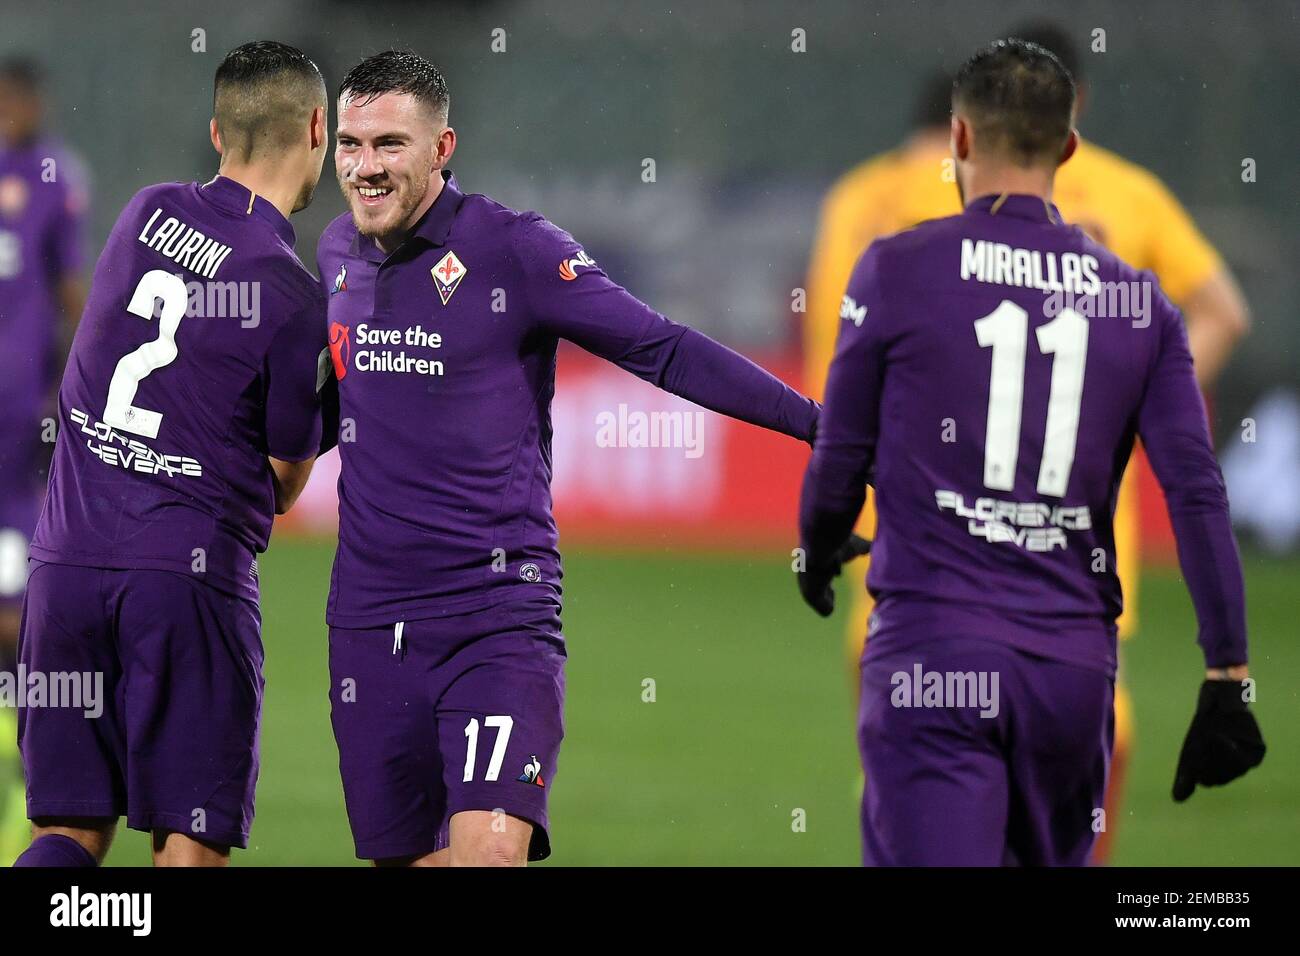 Vincent Laurini, Jordan Veretout and Kevin Mirallas of Fiorentina celebrate  at the end of the match Firenze 30-01-2019 Stadio Artemio Franchi Football  Italy Cup 2018/2019 Fiorentina - AS Roma Foto Andrea Staccioli /